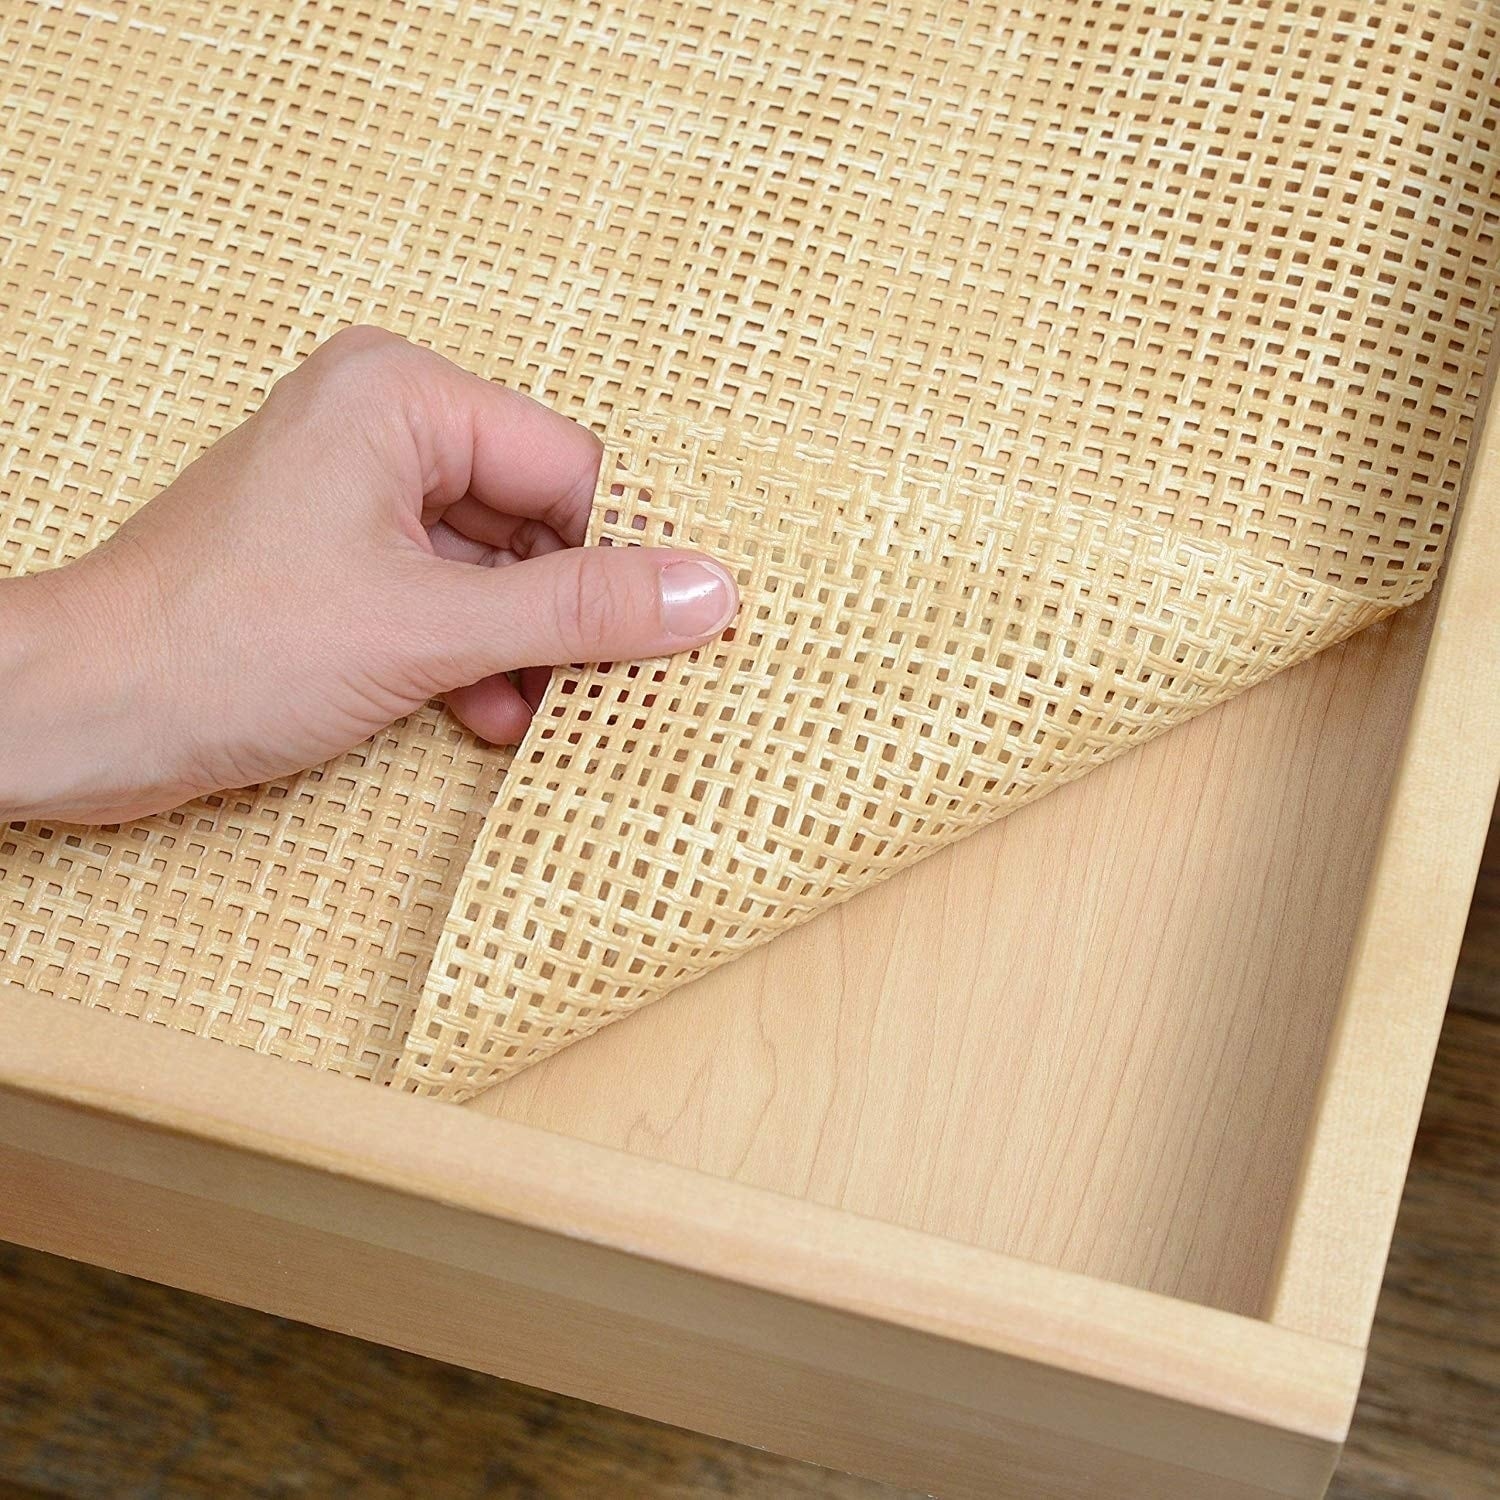 https://ak1.ostkcdn.com/images/products/27034681/Magic-Cover-Weave-Non-Adhesive-Shelf-Liner-12-Inch-by-4-Feet-Lattice-Natural-Pack-of-6-9fb6cc4a-3757-4f85-b08c-c325a706ca45.jpg